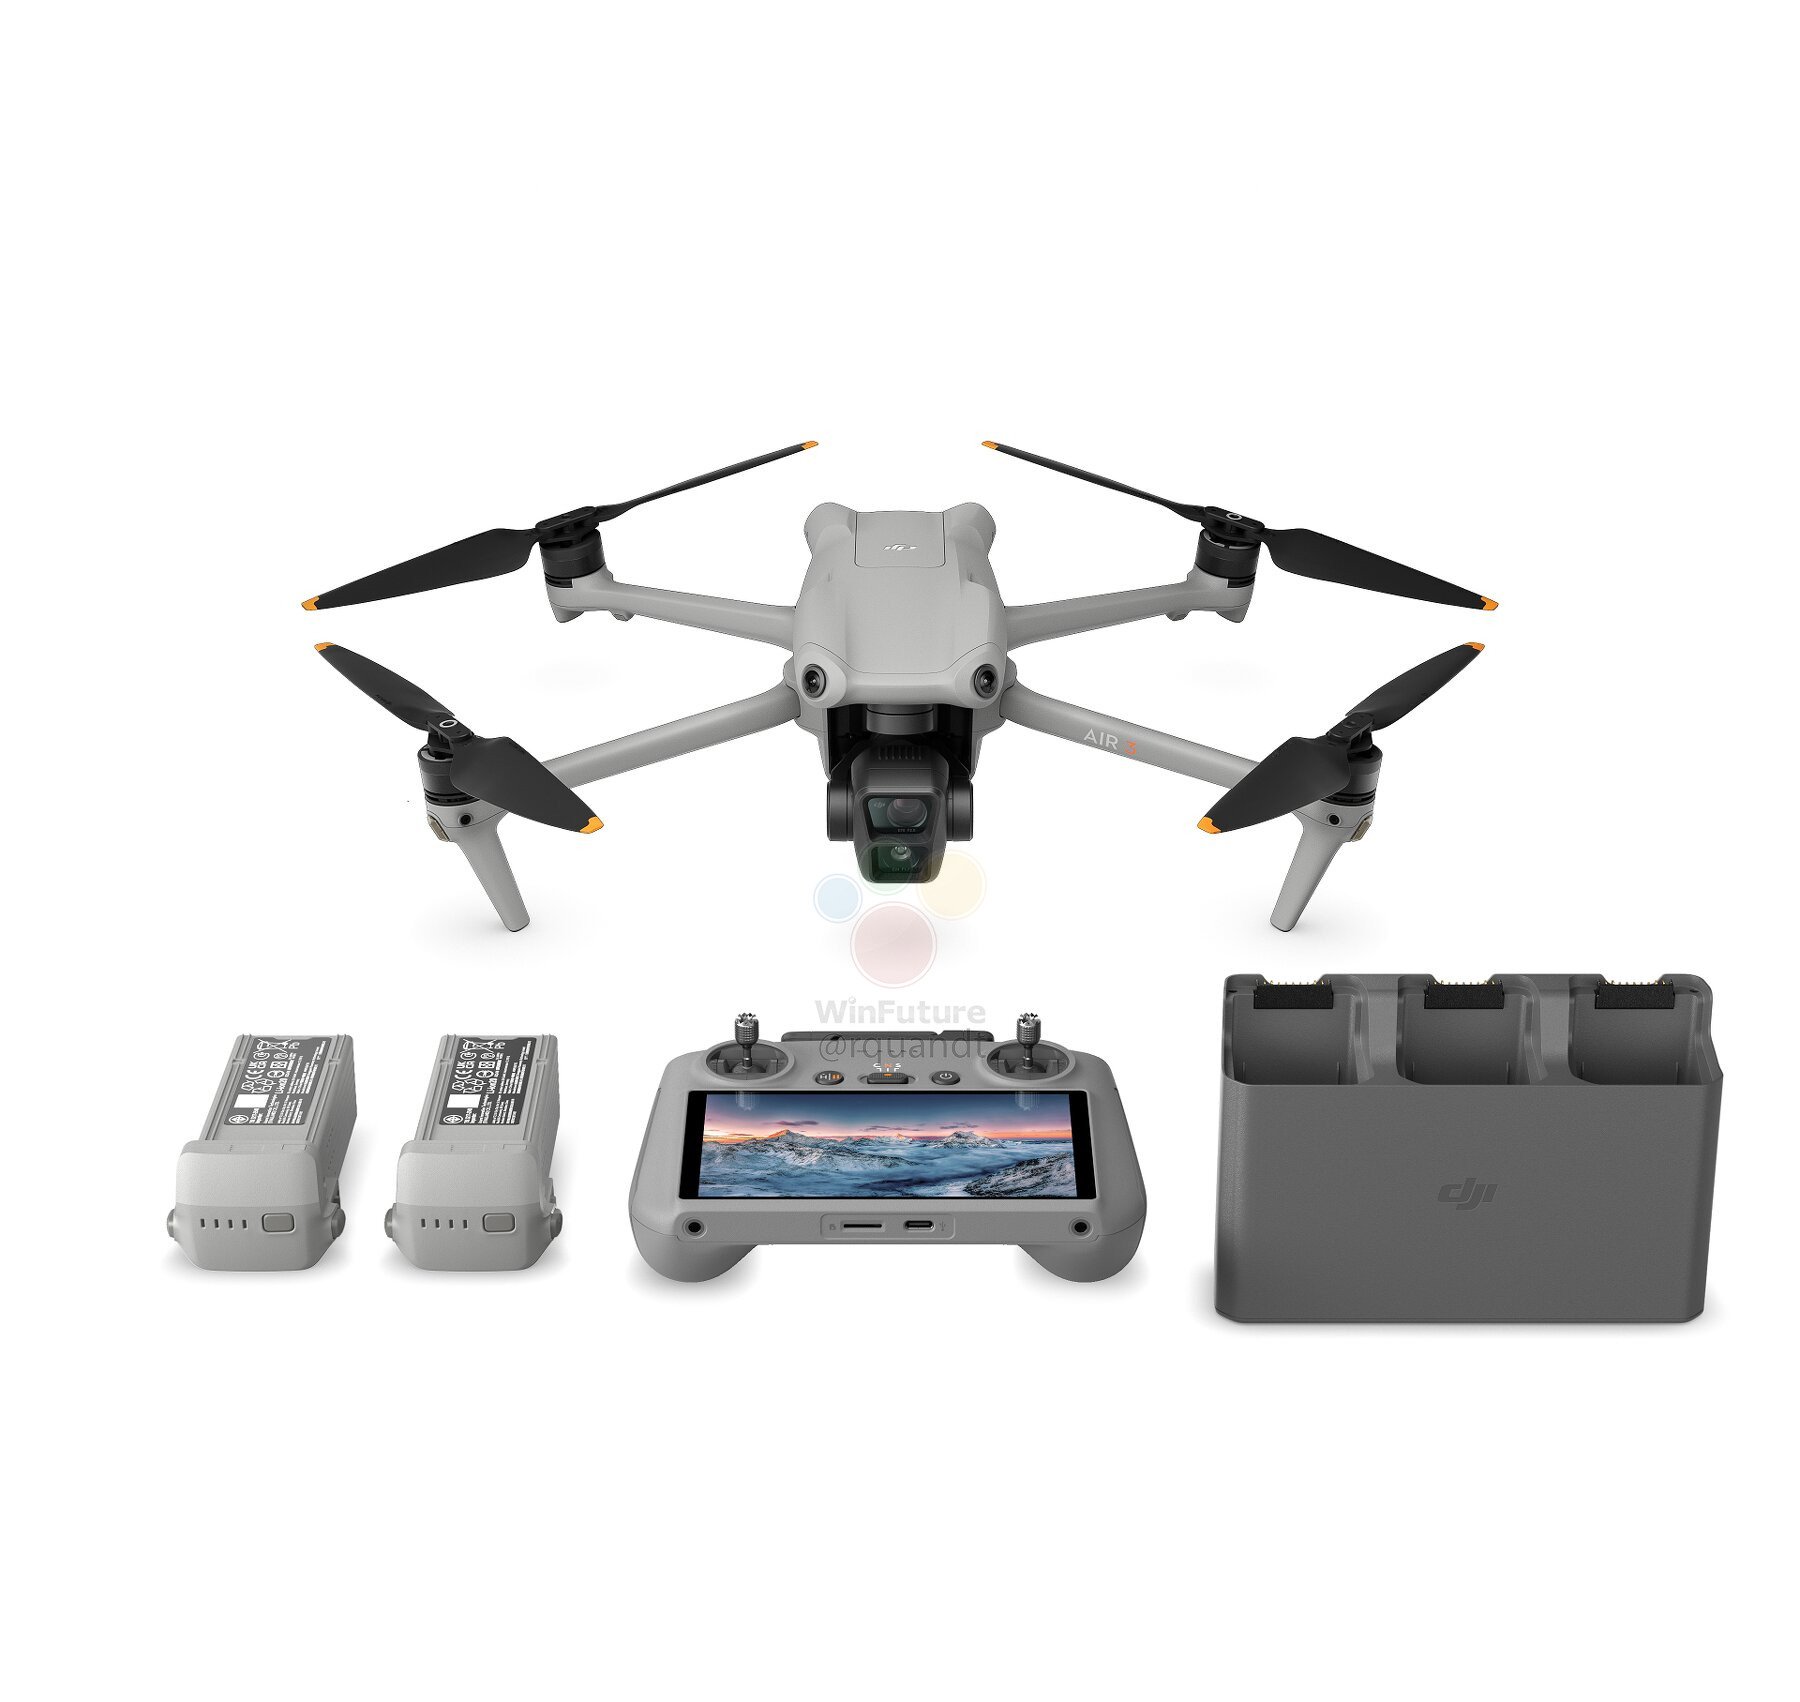 Timeline of DJI Drones: From the Phantom 1 to the Mavic Air